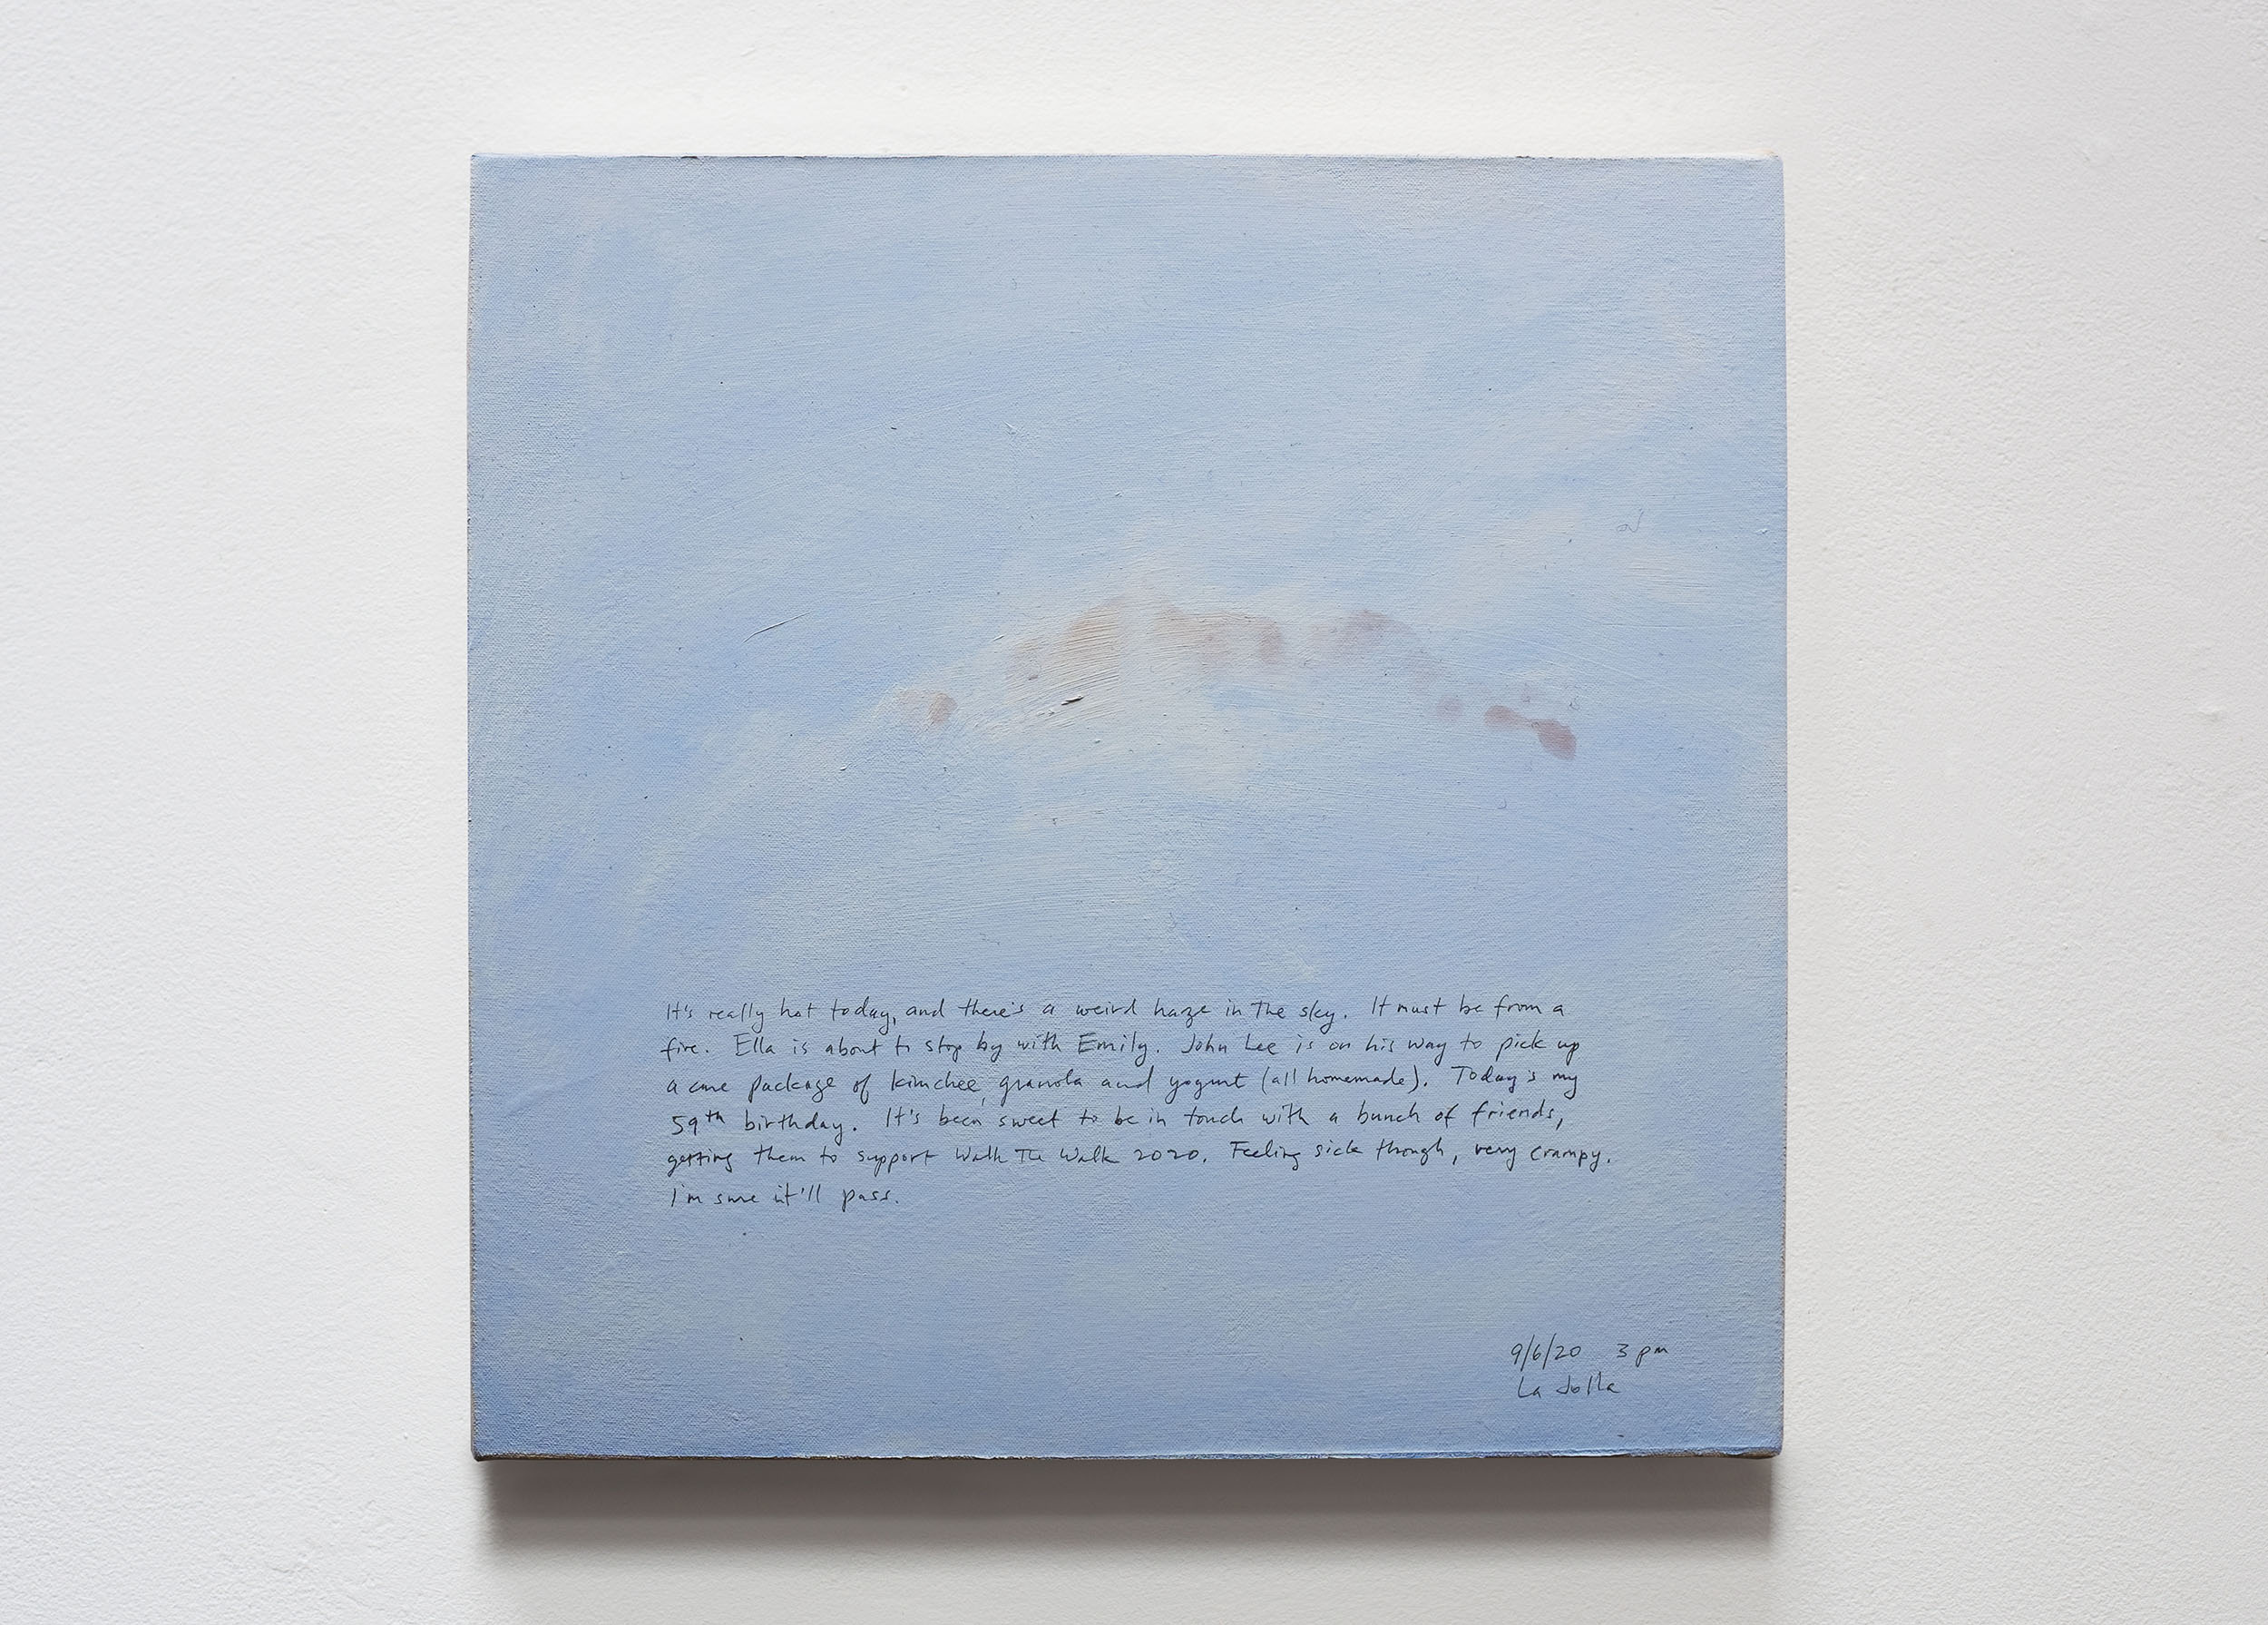 A 14 × 14 inch, acrylic painting of the sky. A journal entry is handwritten on the painting:

“It’s really hot today, and there’s a weird haze in the sky. It must be from a fire. Ella is about to stop by with Emily. John Lee is on his way to pick up a care packaged of kimchee, granola and yogurt (all homemade). Today’s my 59th birthday. It’s been sweet to be in touch with a bunch of friends, getting them to support Walk the Walk 2020. Feeling sick though, very crampy. I’m sure it’ll pass.

9/6/20 3 pm
La Jolla”